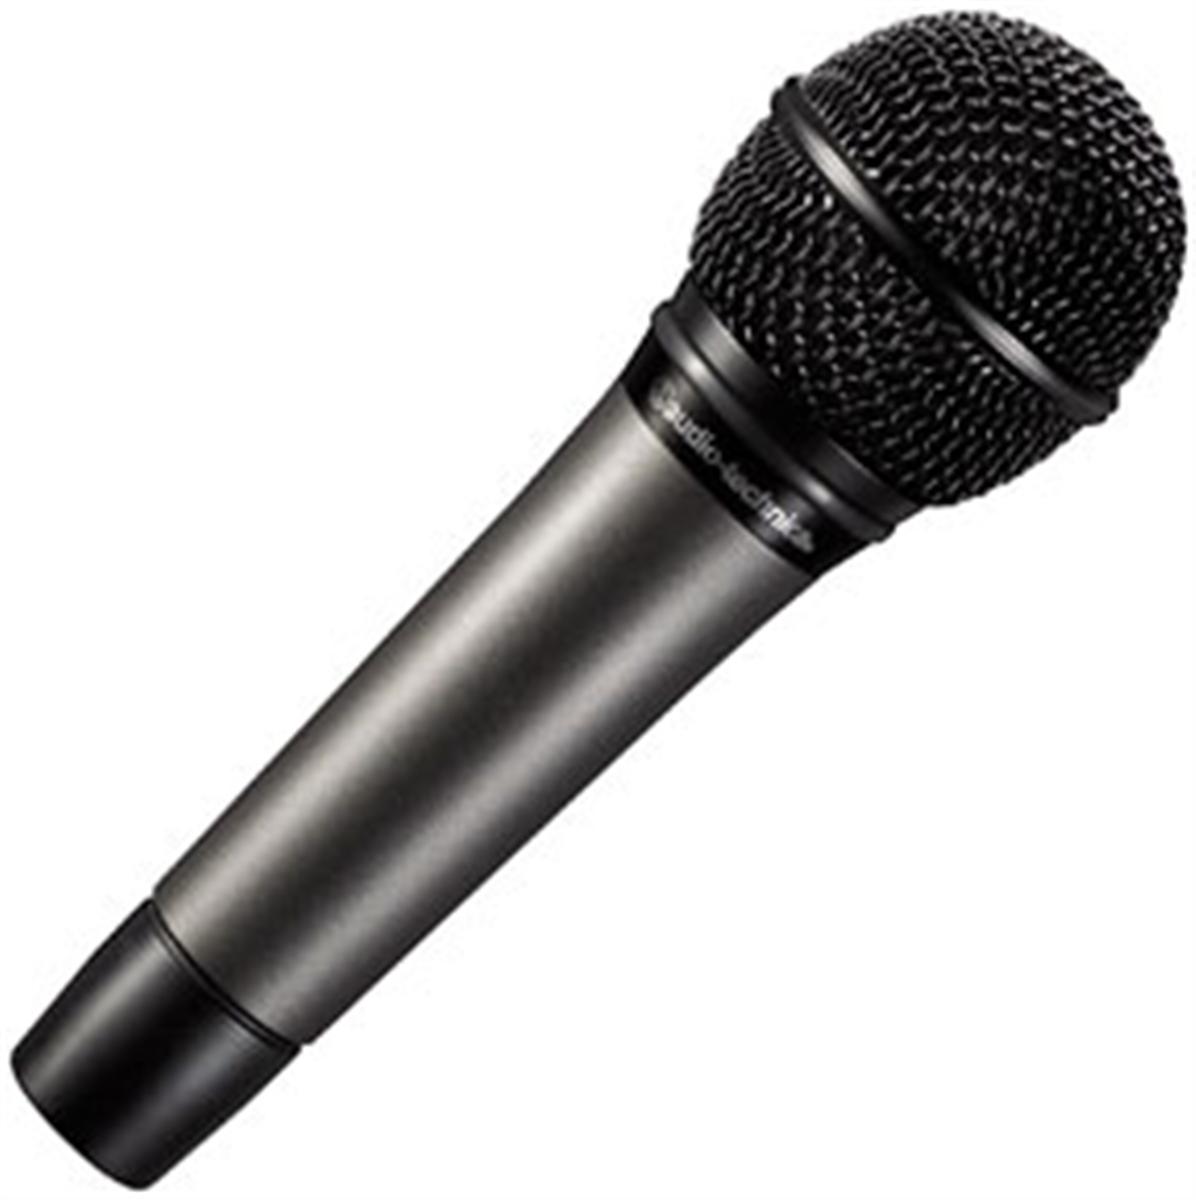 Microphone Clipart - Free Clipart Images